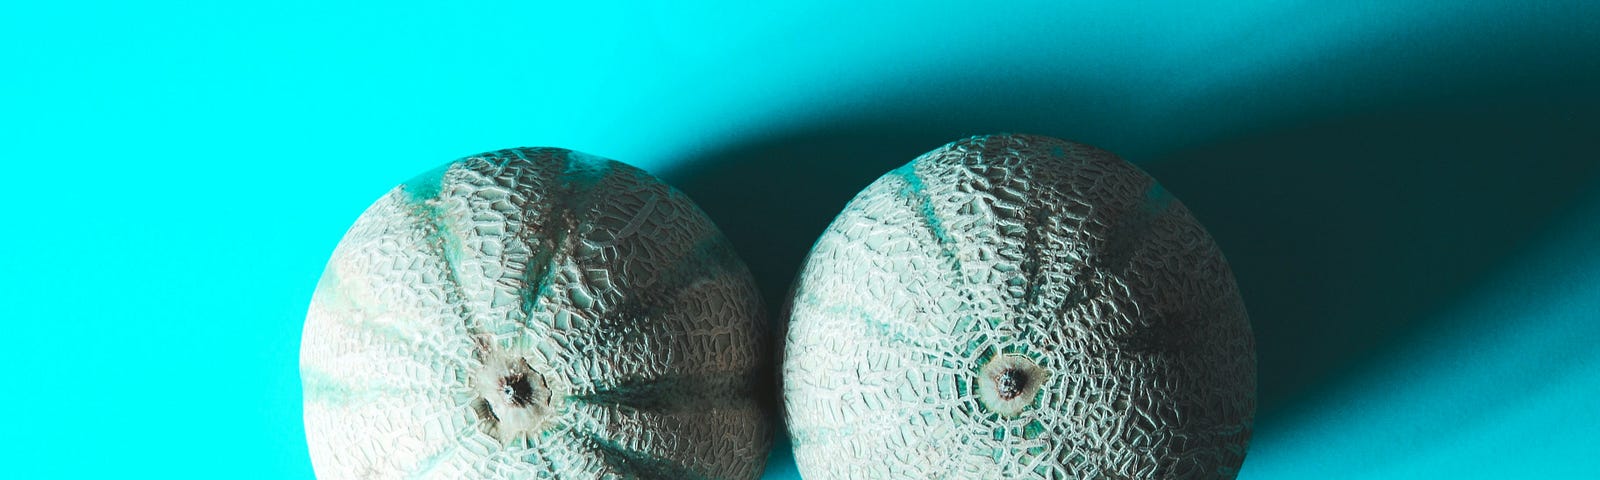 Actual melons to represent the topic being discussed in the article.